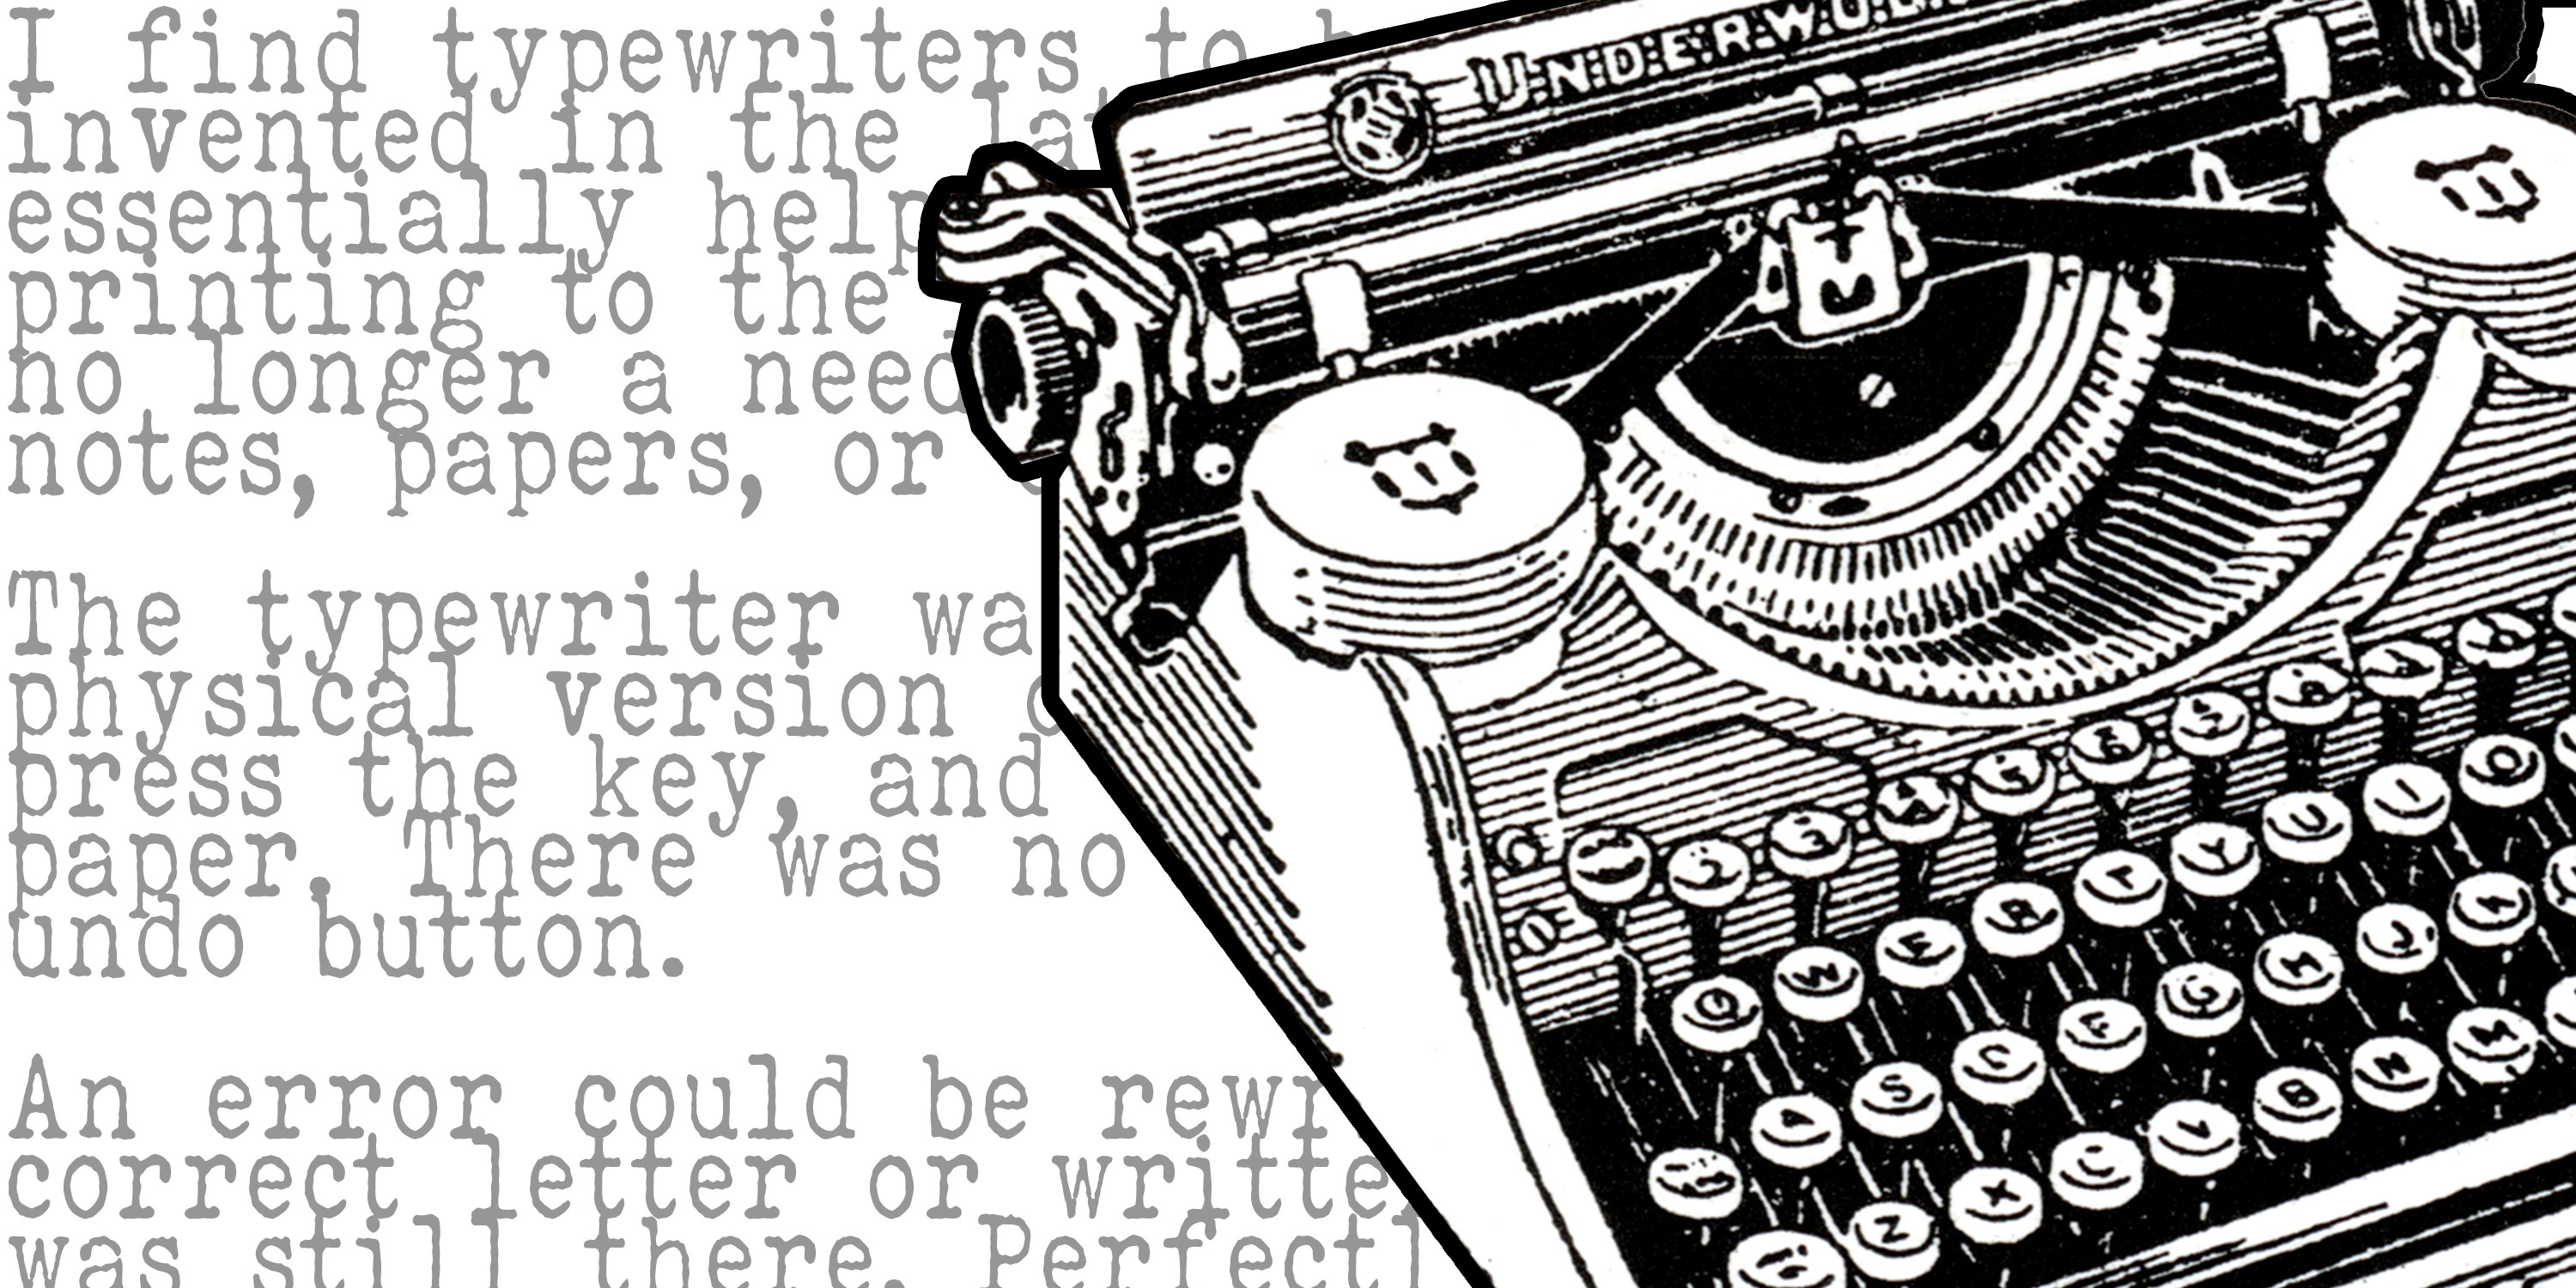 Why the Office Needs a Typewriter Revolution